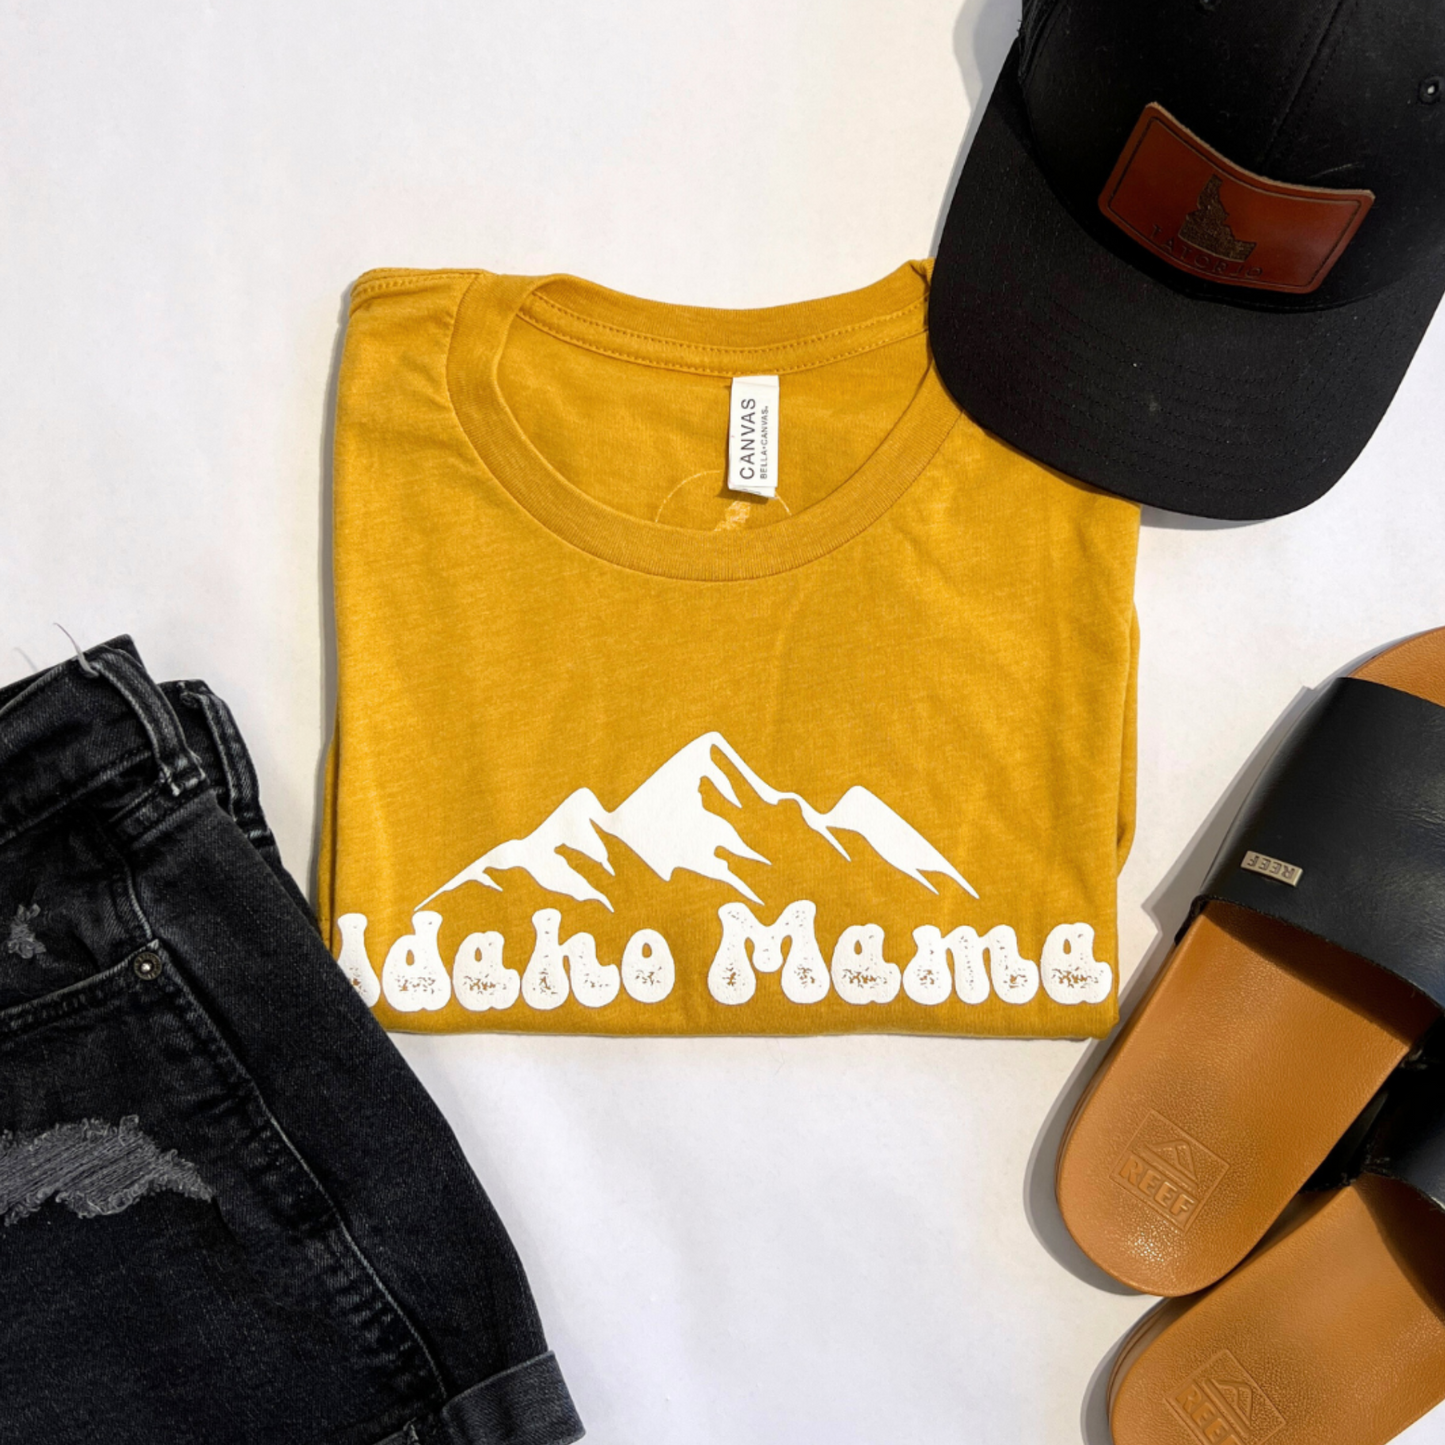 Idaho Mama shirt in Sage green. This cute Idaho Mama shirt is a cute style that can be dressed up or down. This t shirt is designed right here in Idaho by an Idaho Apparel Company. This Idaho T Shirt showcases the adventure an Idaho pride. The letters on the Idaho T shirt say Idaho Mama. 